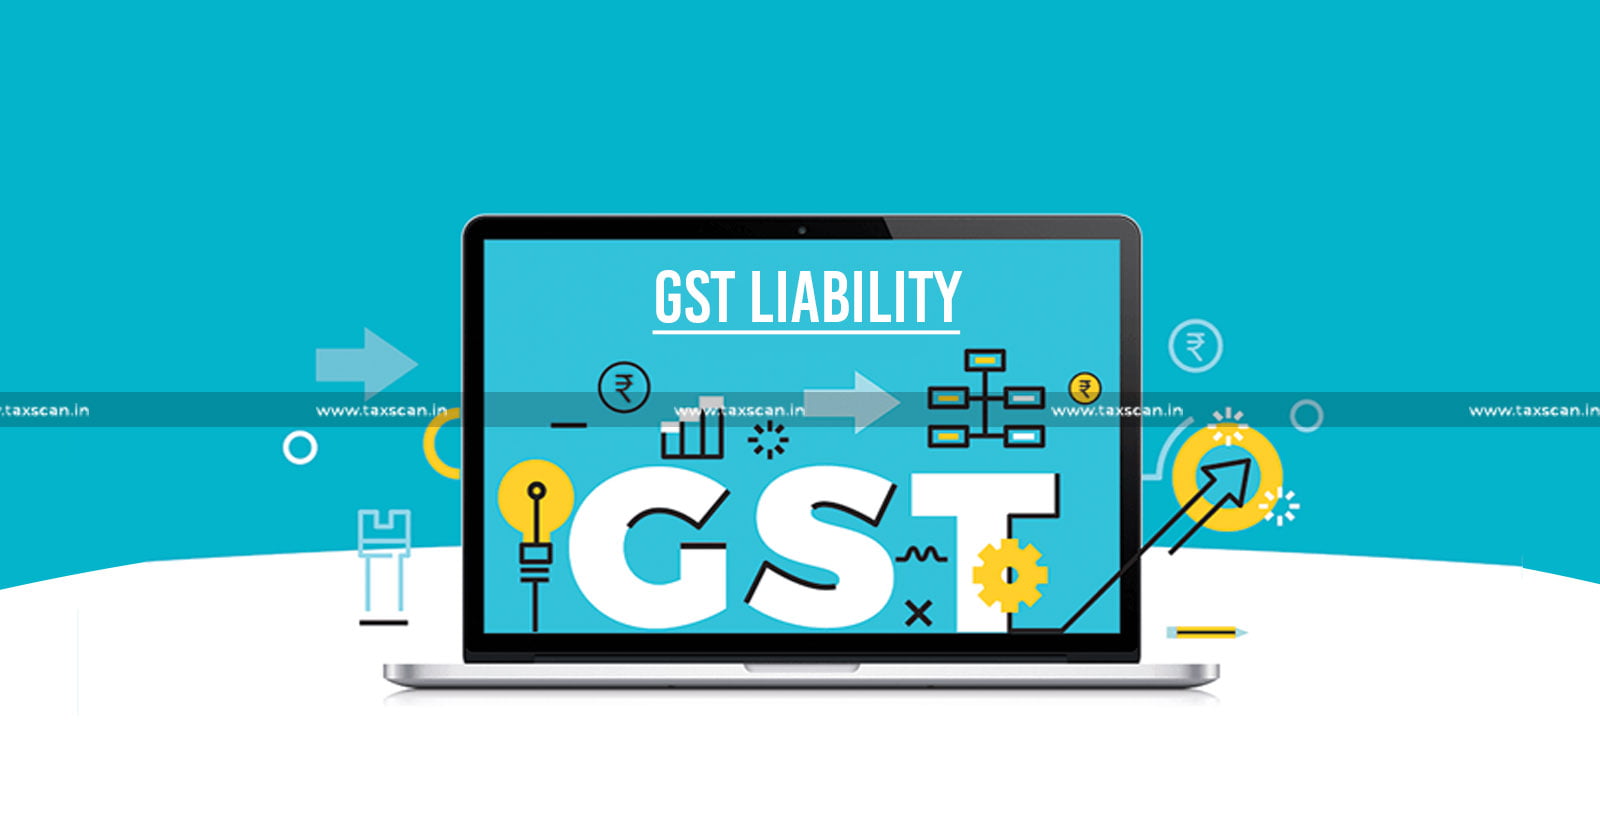 Delay in Discharging GST Liabilities - COVID-19 Impact in Business-Madras HC - Submission of Fresh Representation - Commissioner - taxscan